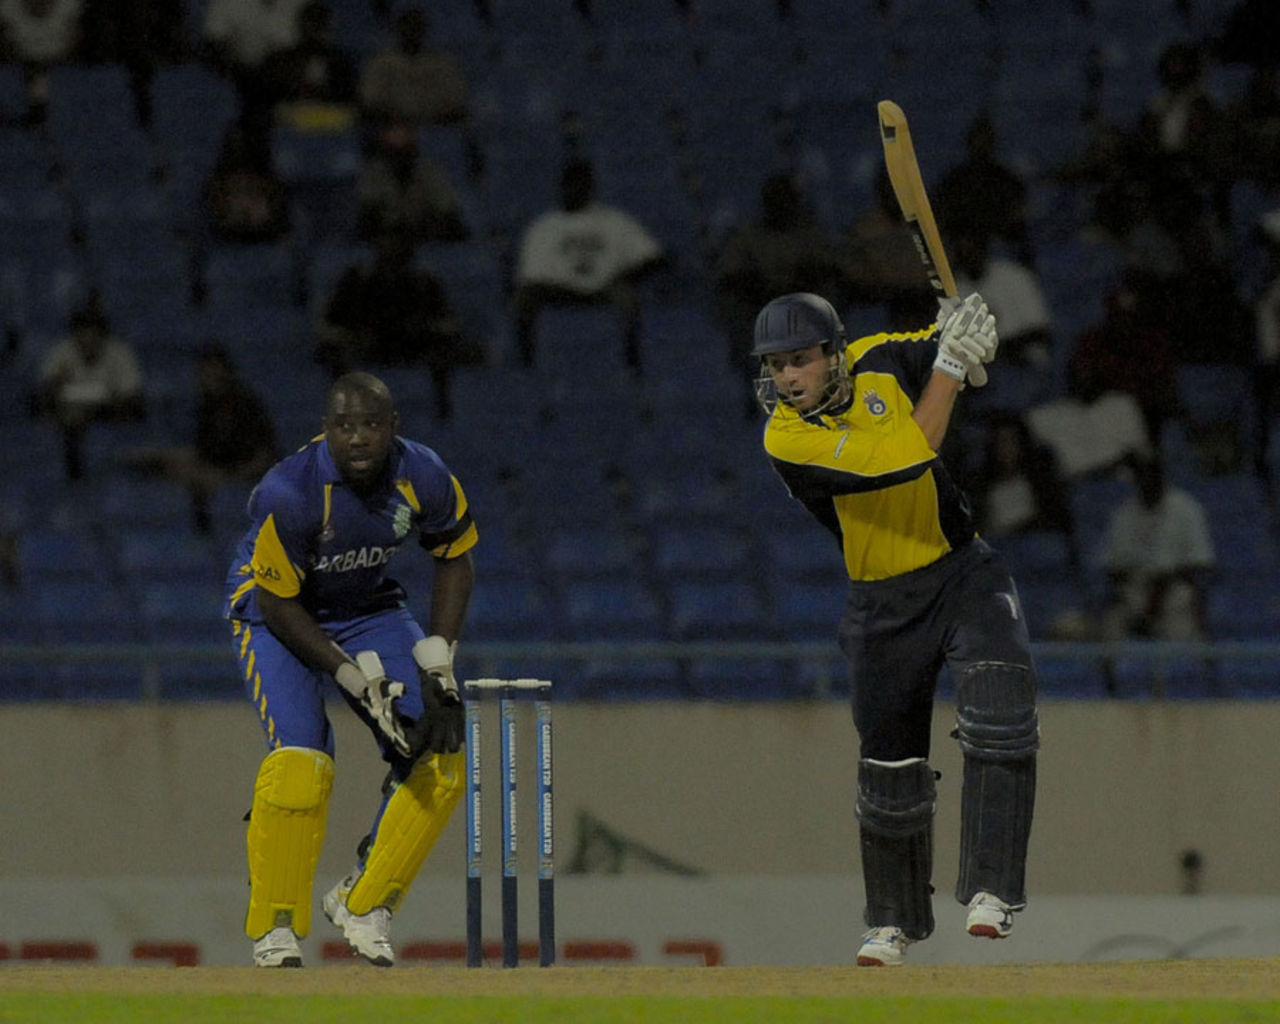 James Vince scores the winning run in the Super Over for Hampshire, Barbados v Hampshire, Antigua, Caribbean T20, January 13, 2011 